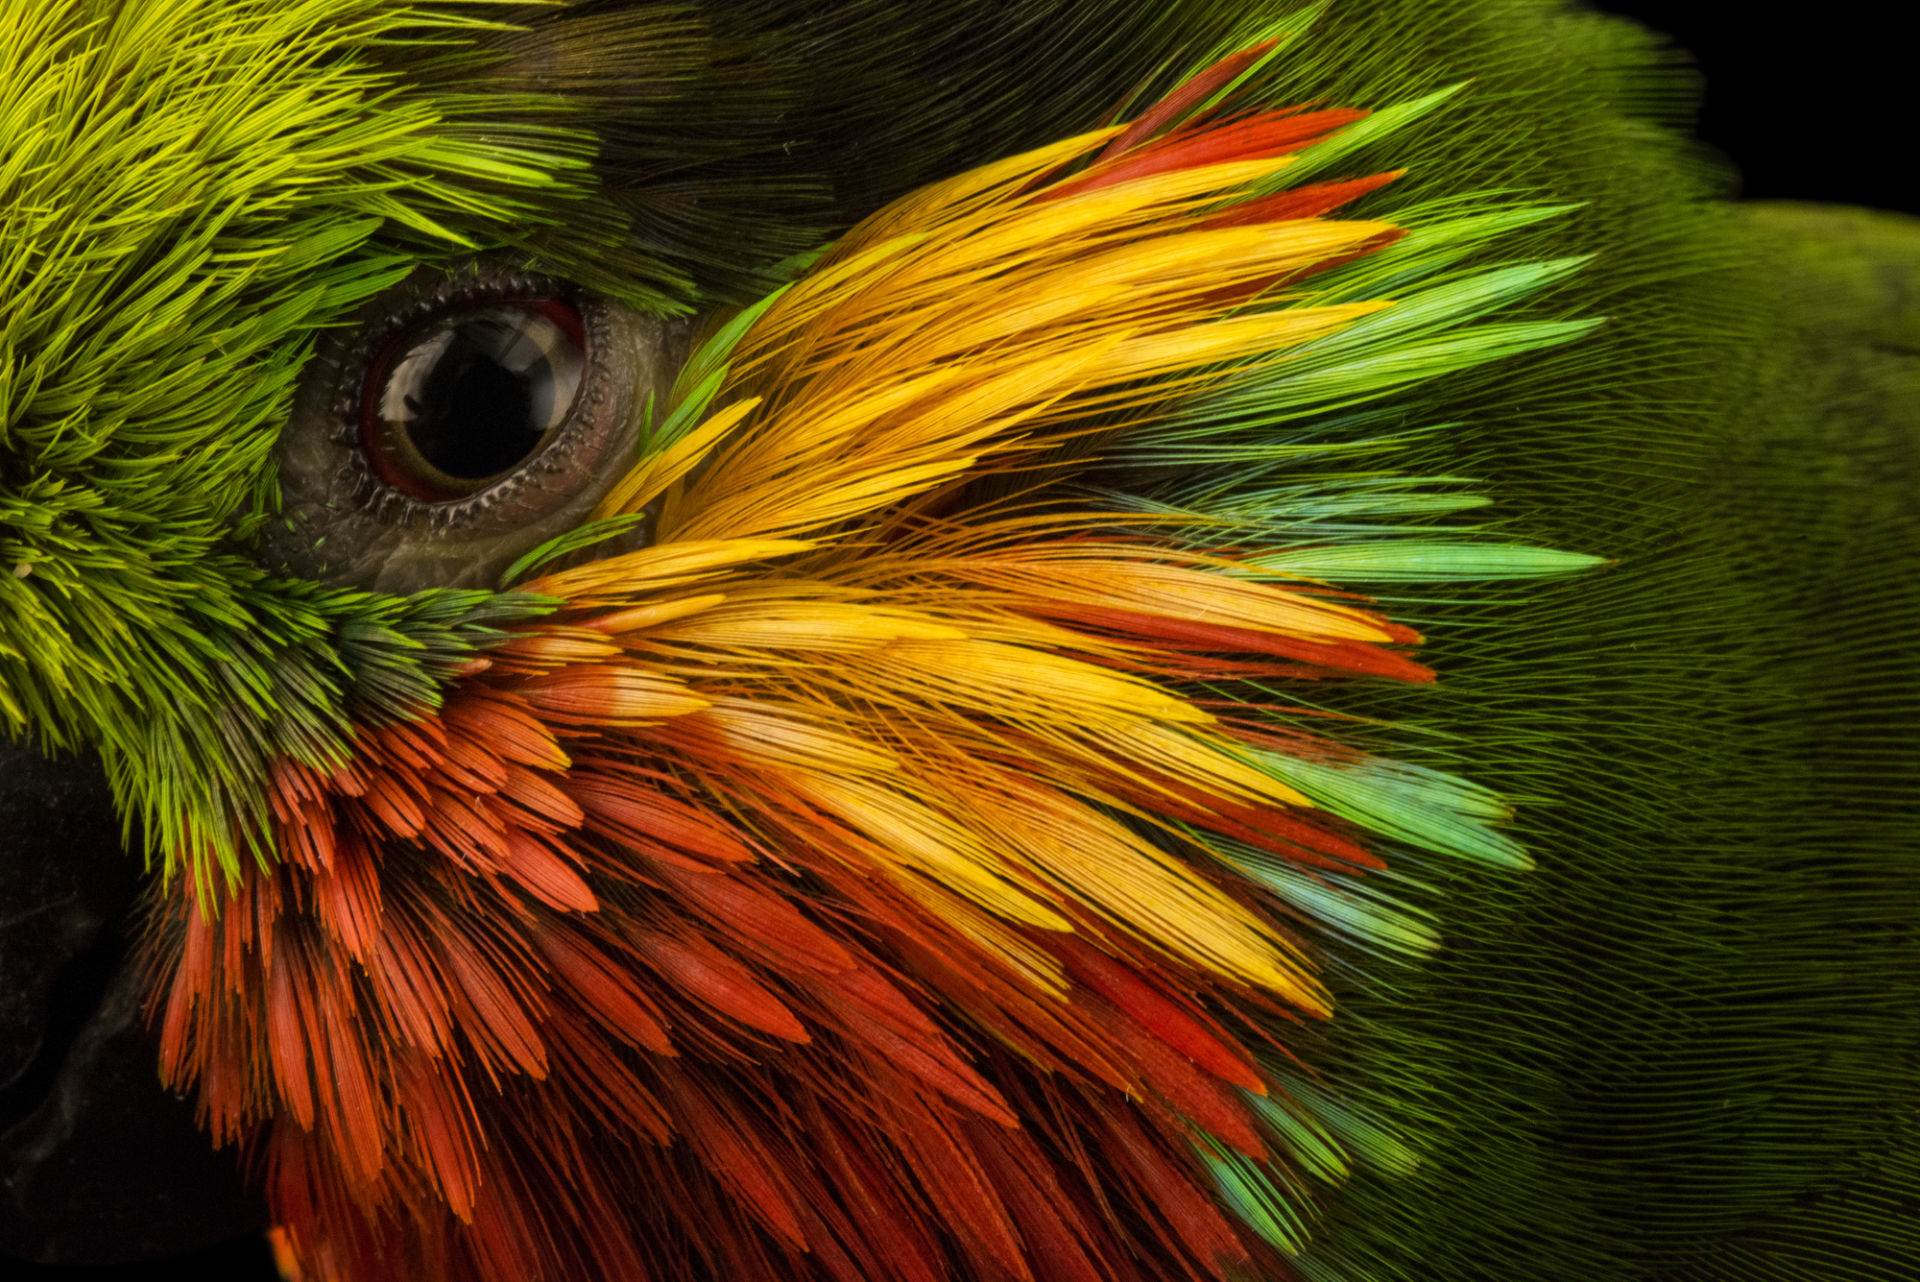 Edward S Fig Parrot At Loro Parque Fundacion - National Geographic Best Photos 2018 - HD Wallpaper 